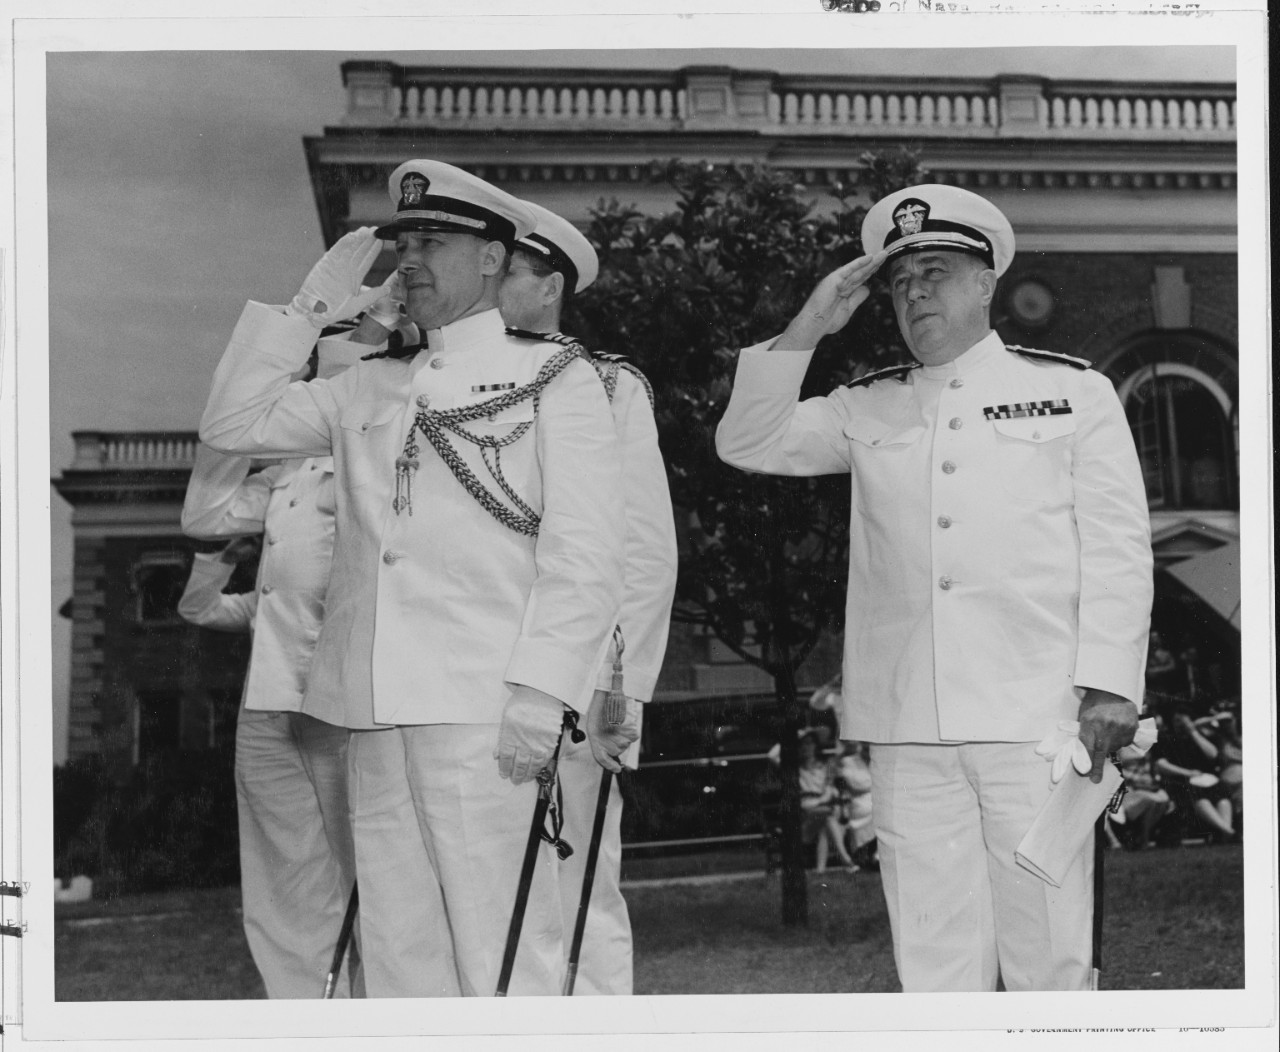 Rear Admiral Manley H. Simons, USN, at right salutes during ceremonies.